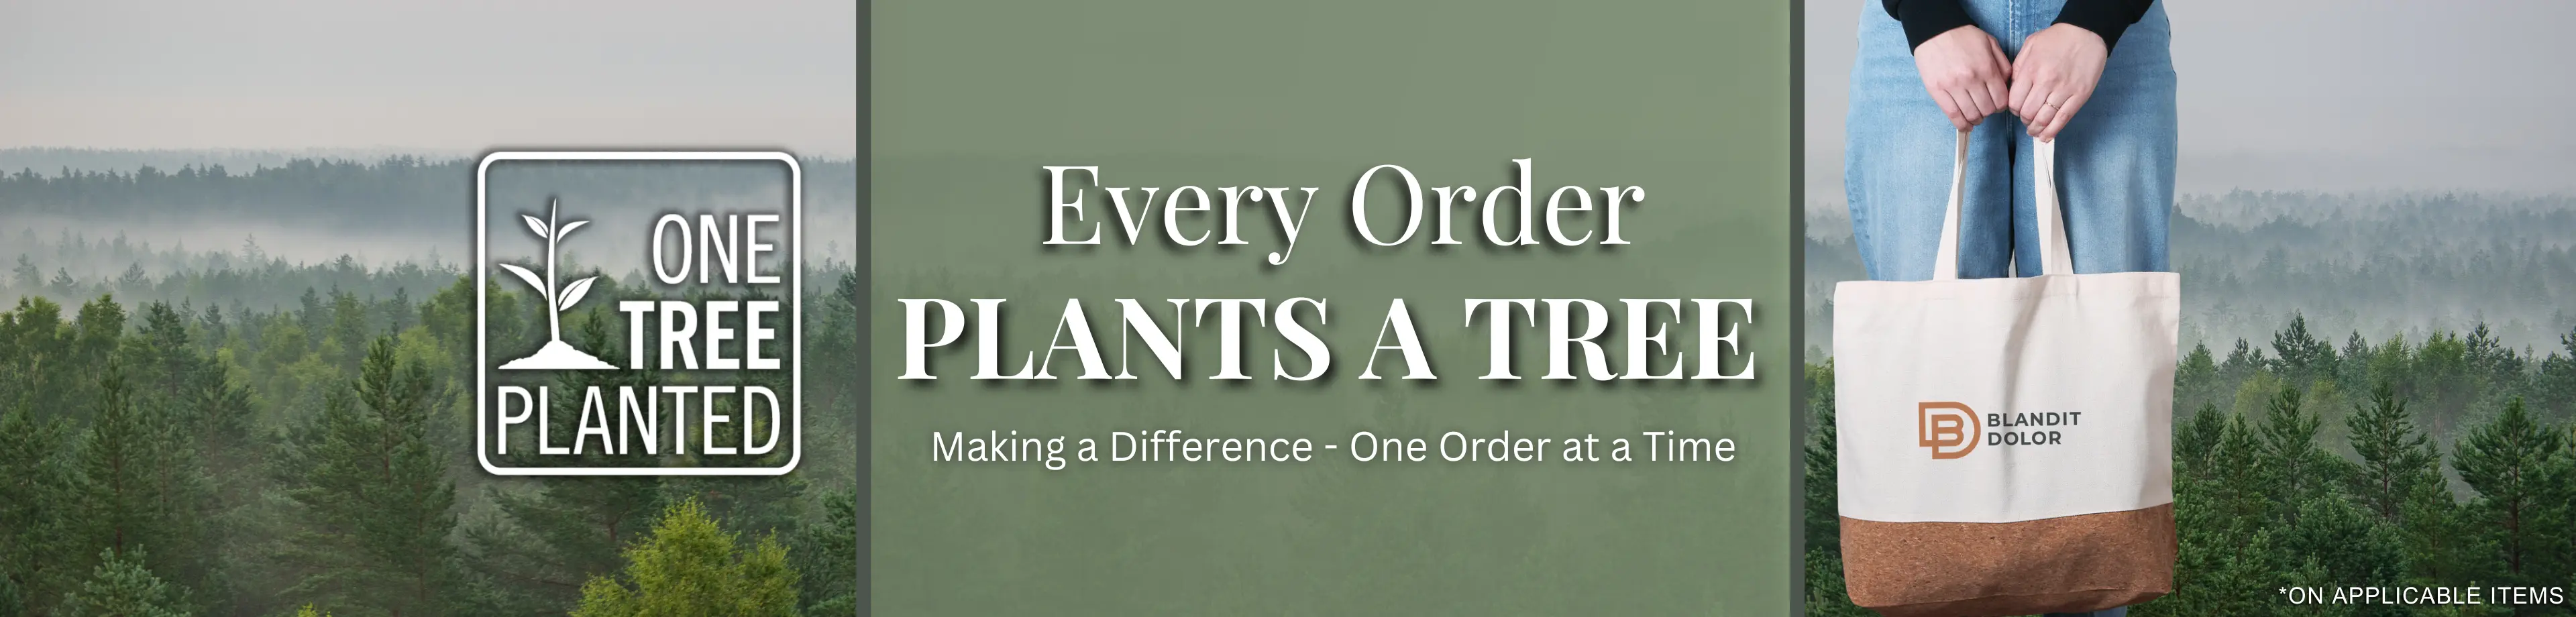 Plant a tree with every order decorated through us, when you select any of these items - available now!